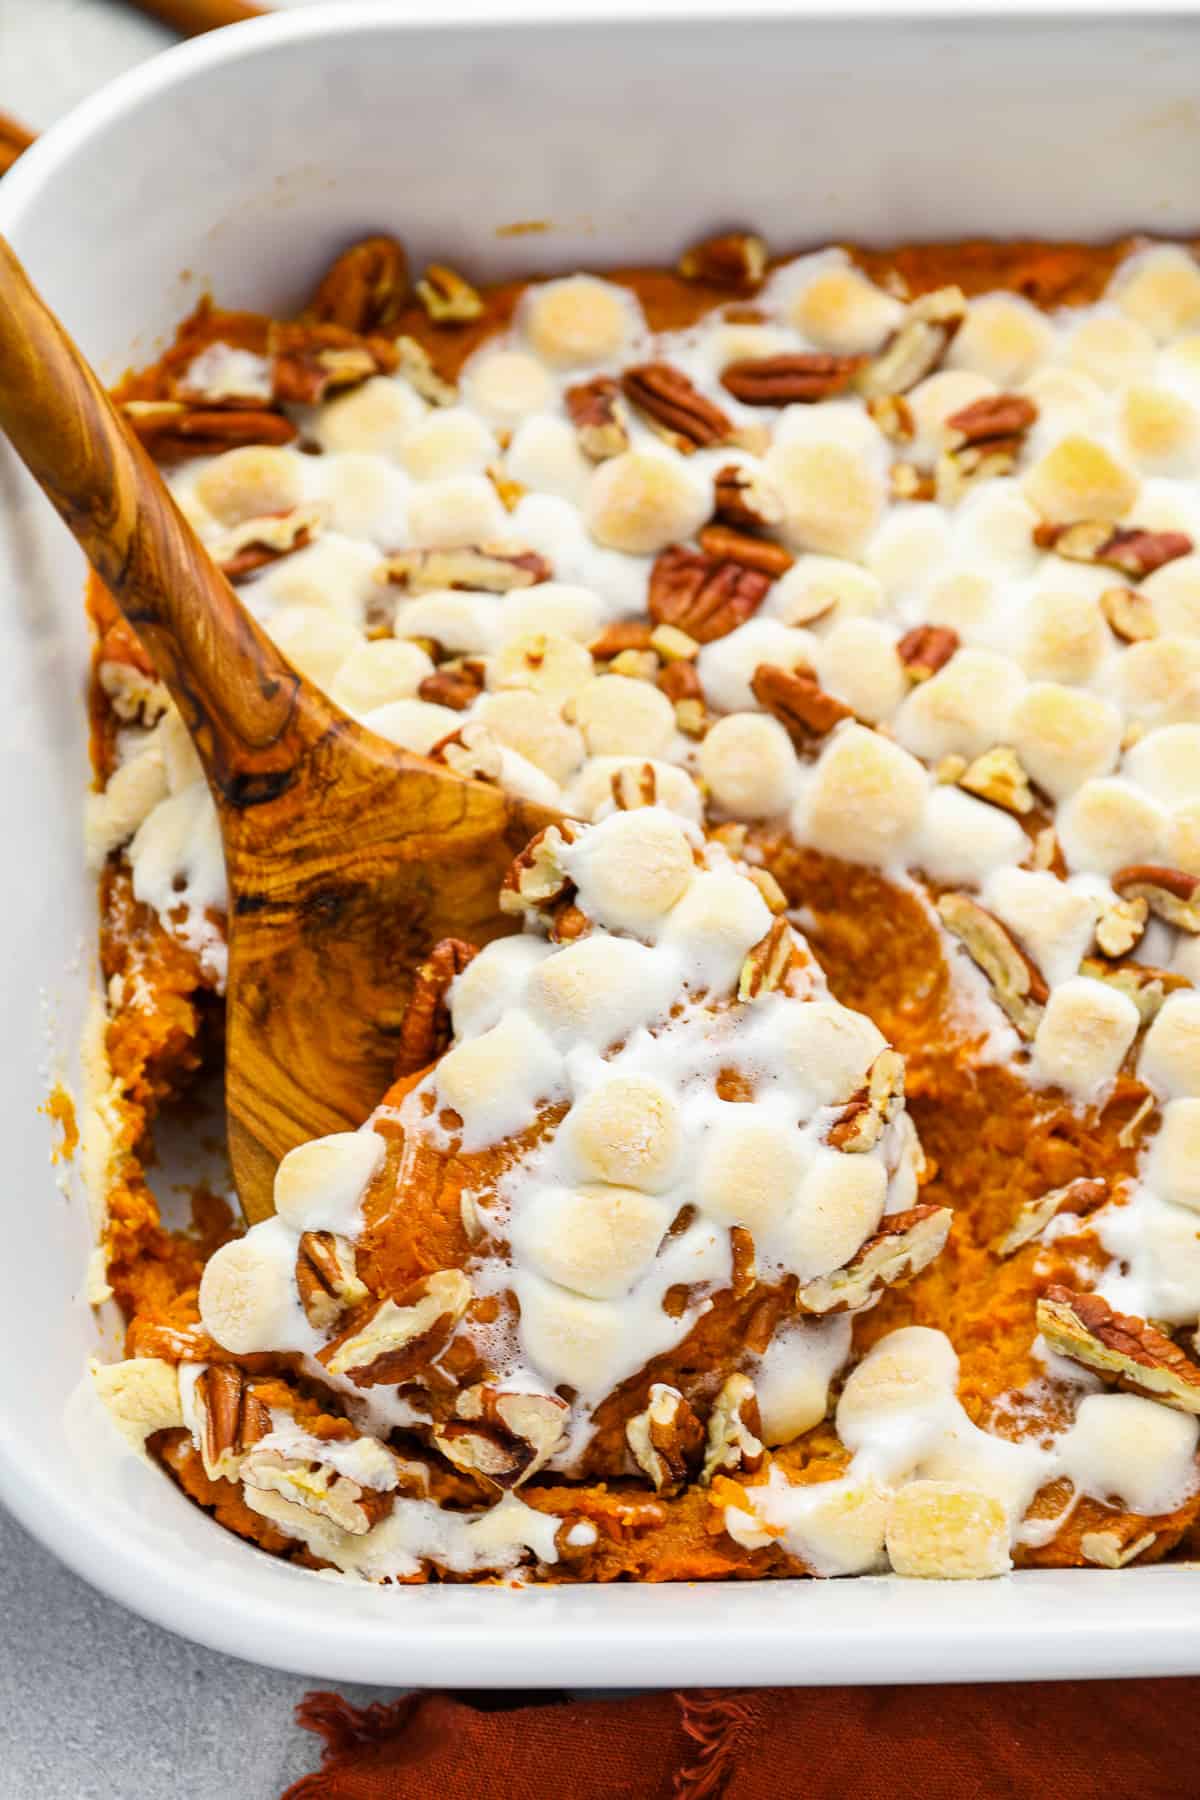 a wooden spoon scooping sweet potato casserole from a white rectangular baking dish.